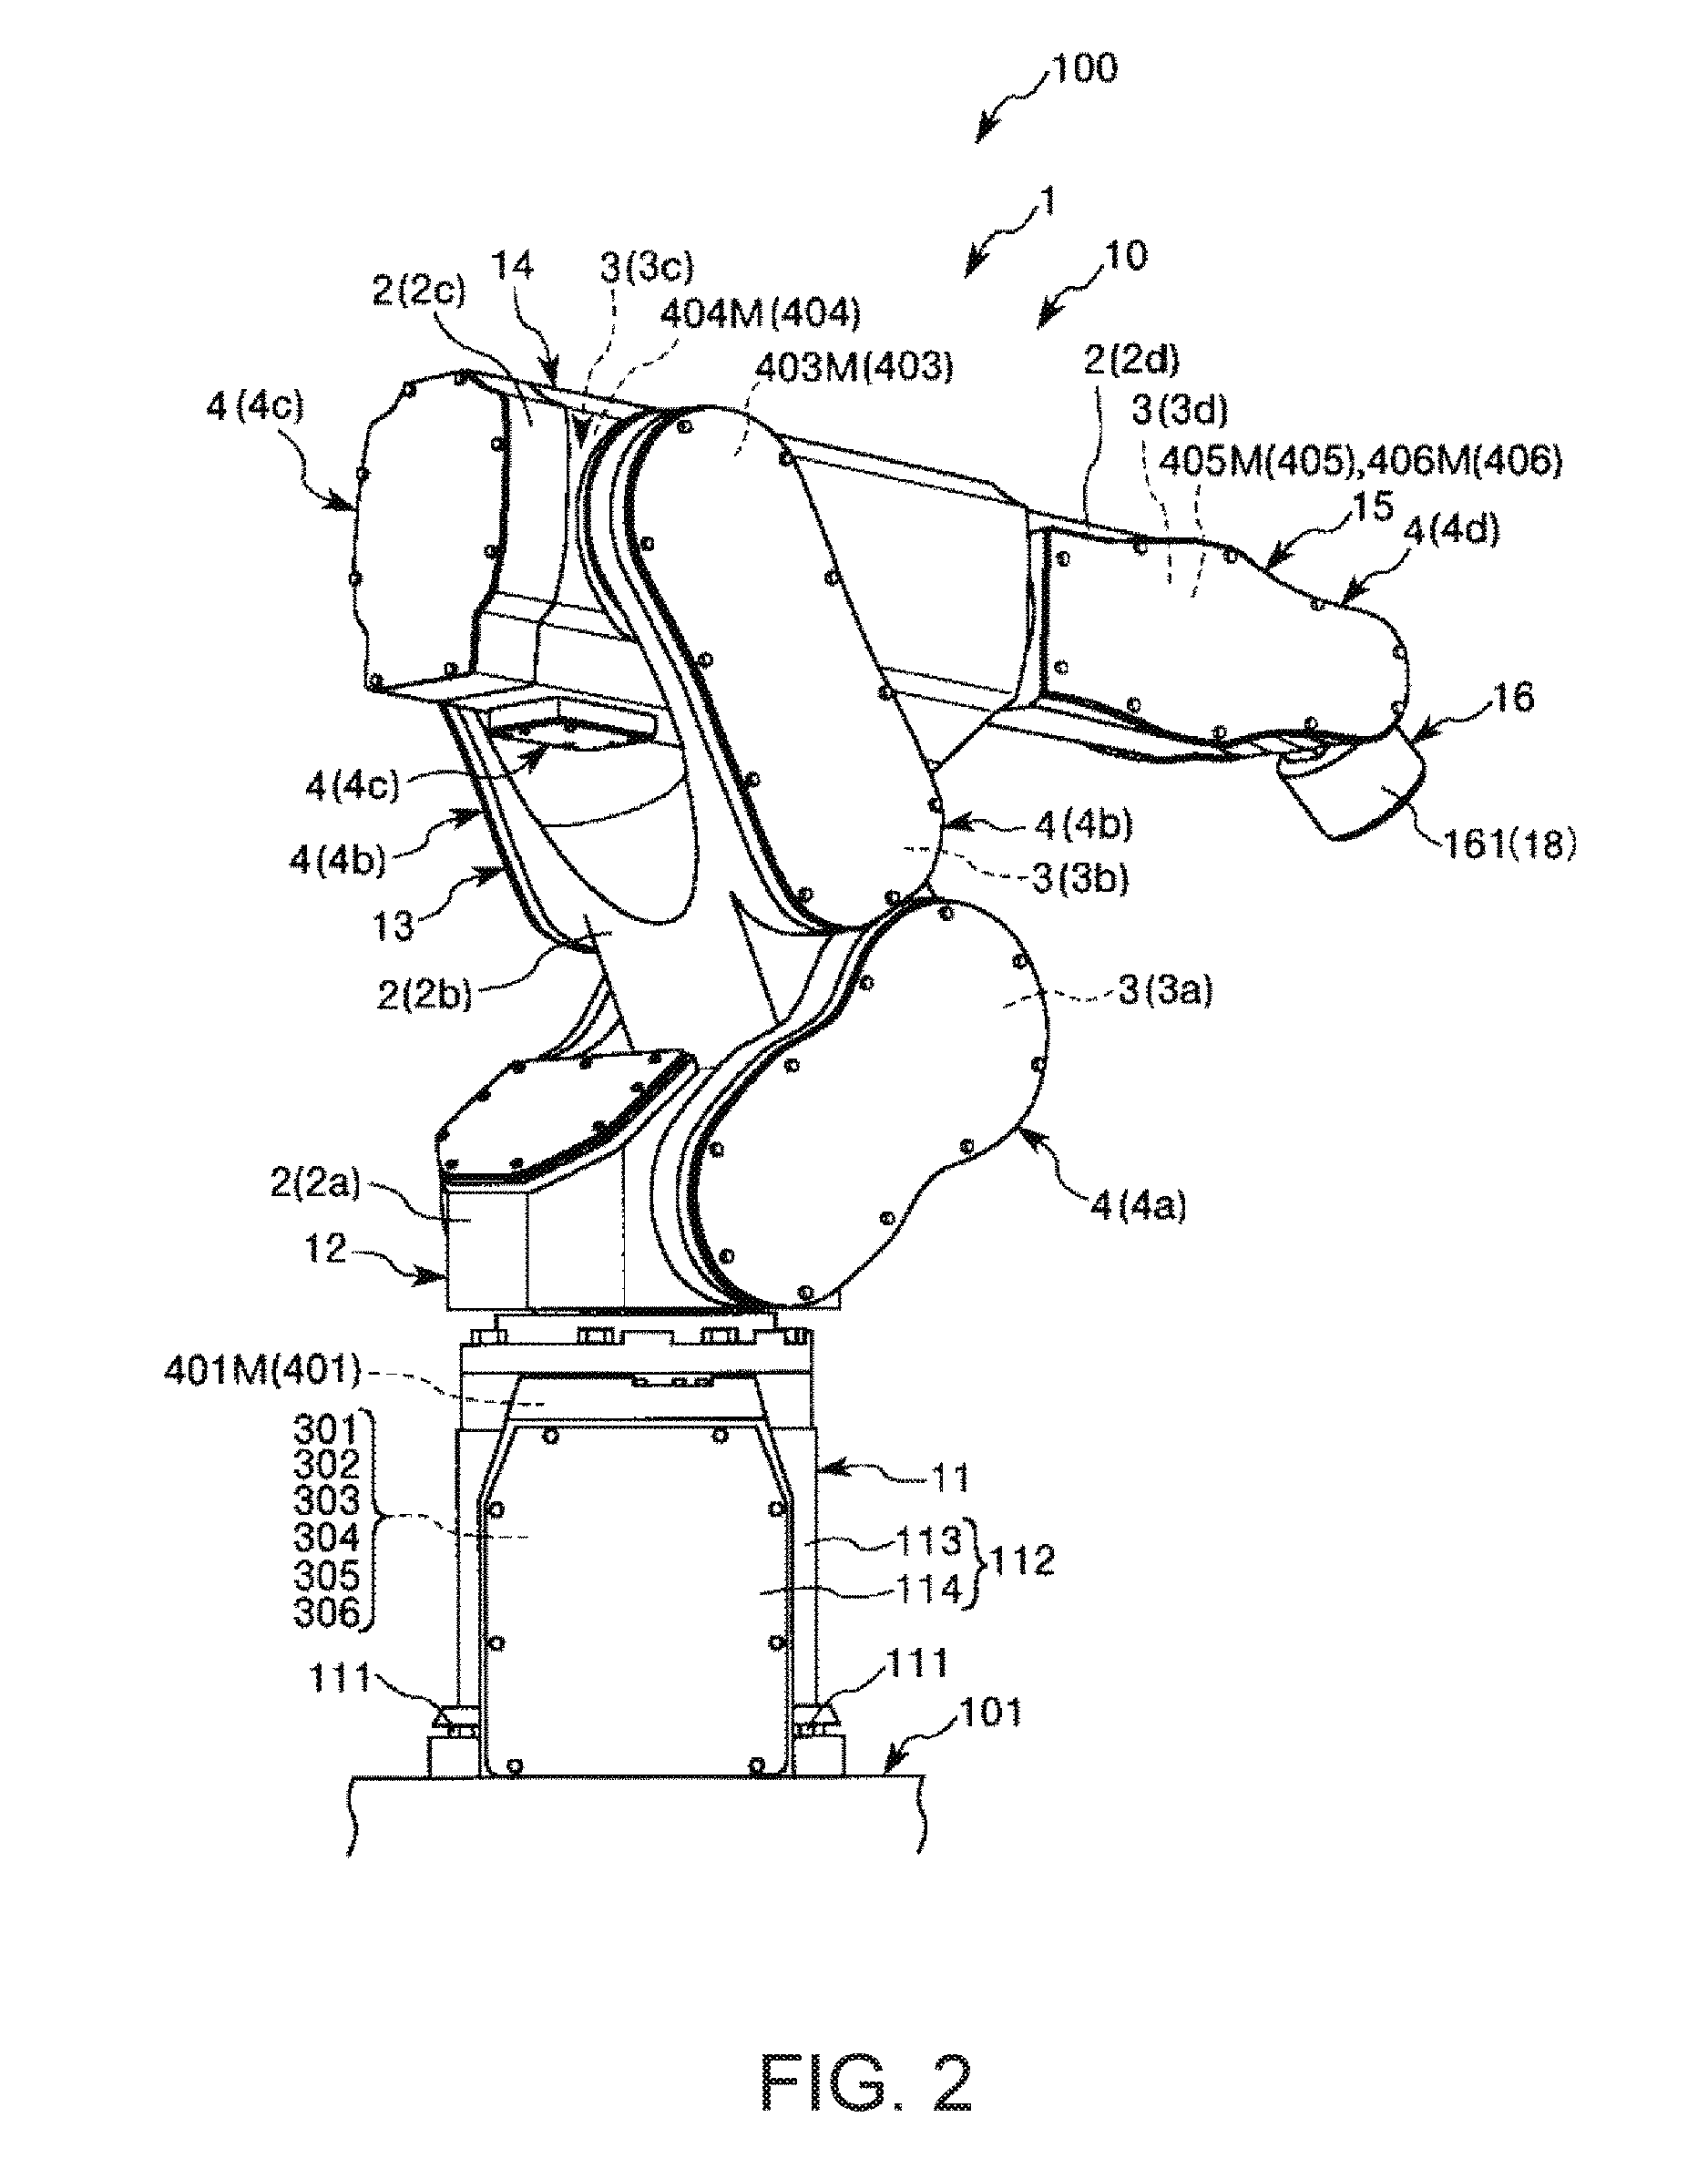 Robot, control apparatus, and robot system